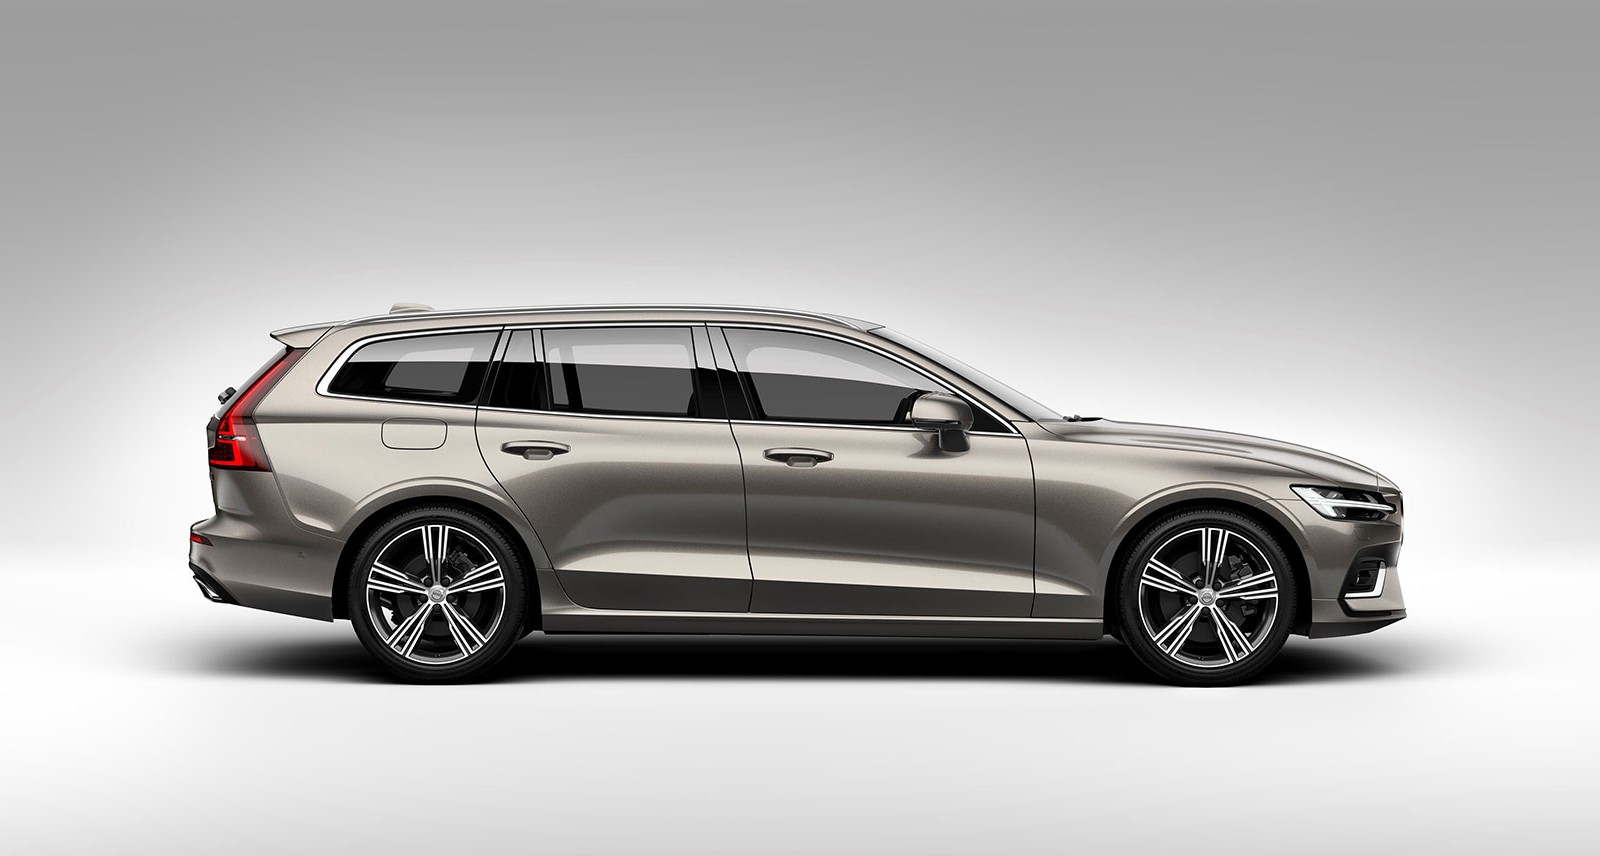 A Visual Chronicle of the Volvo Station Wagon